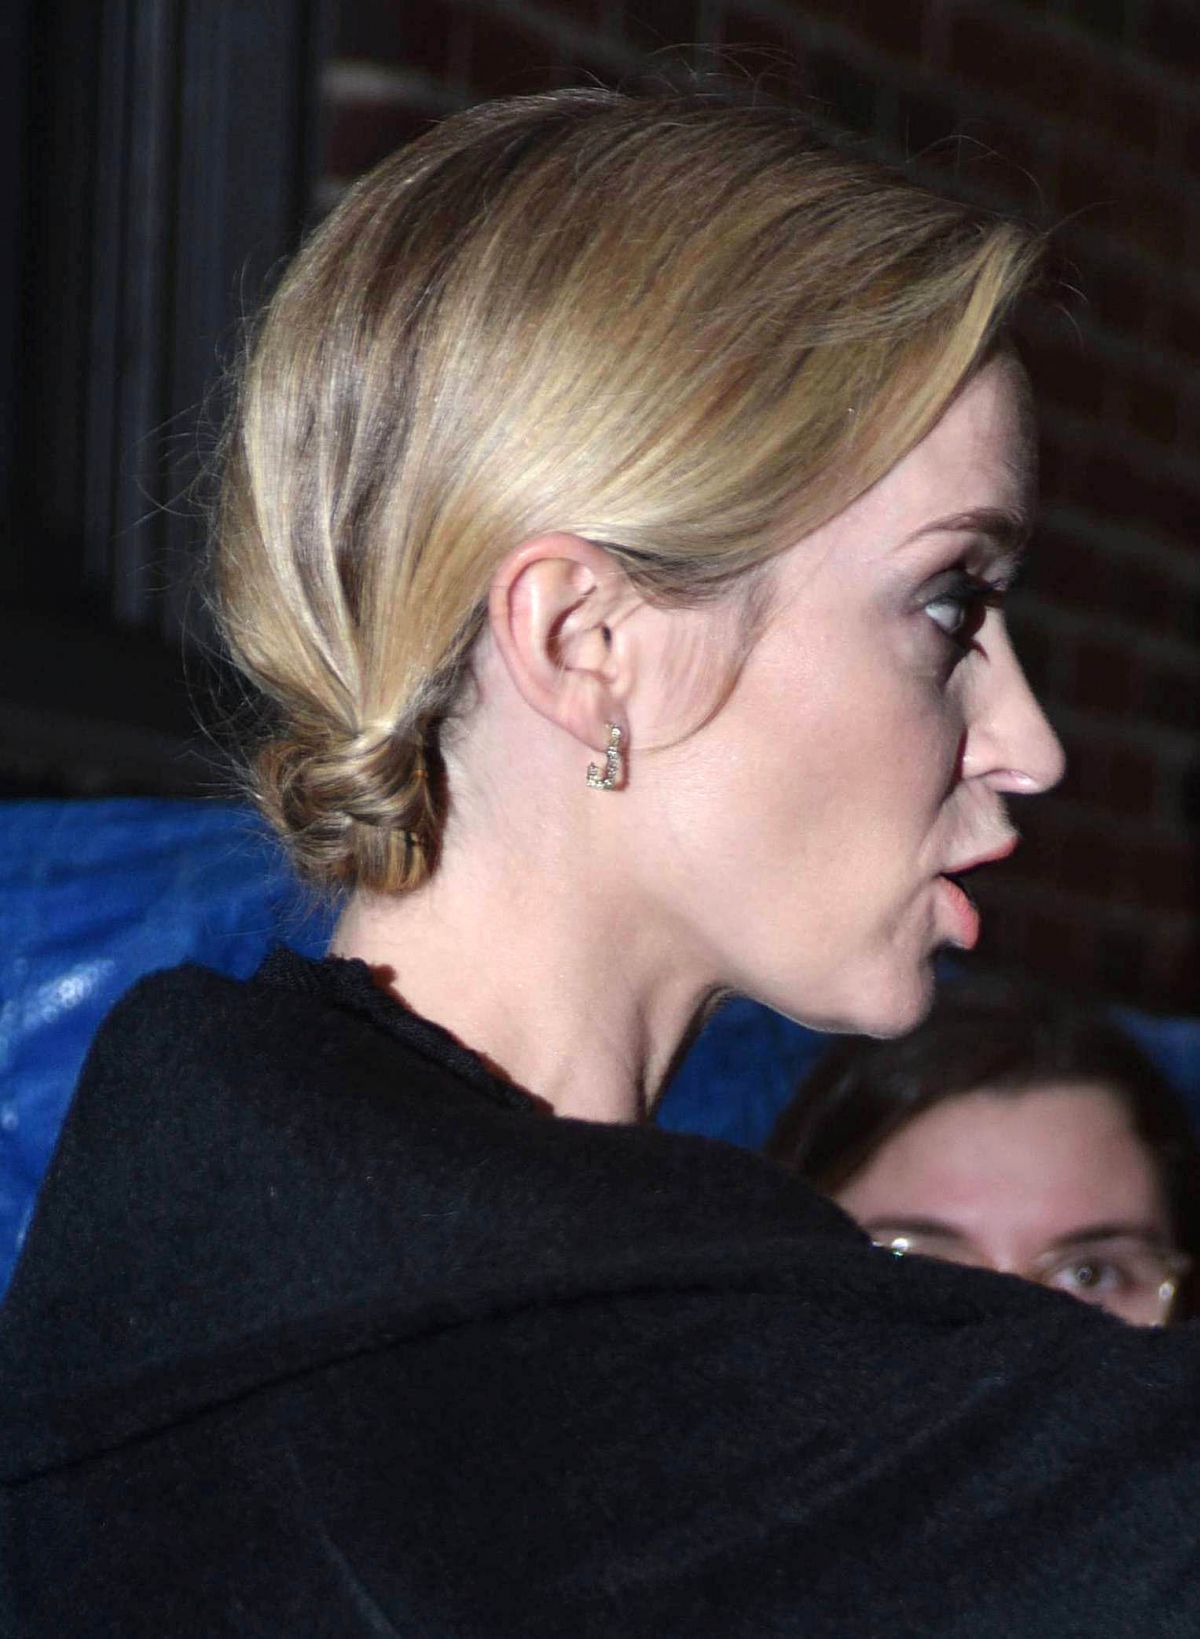 emily-blunt-arriving-at-the-late-show-with-stephen-colbert-in-nyc-32918-6.jpeg